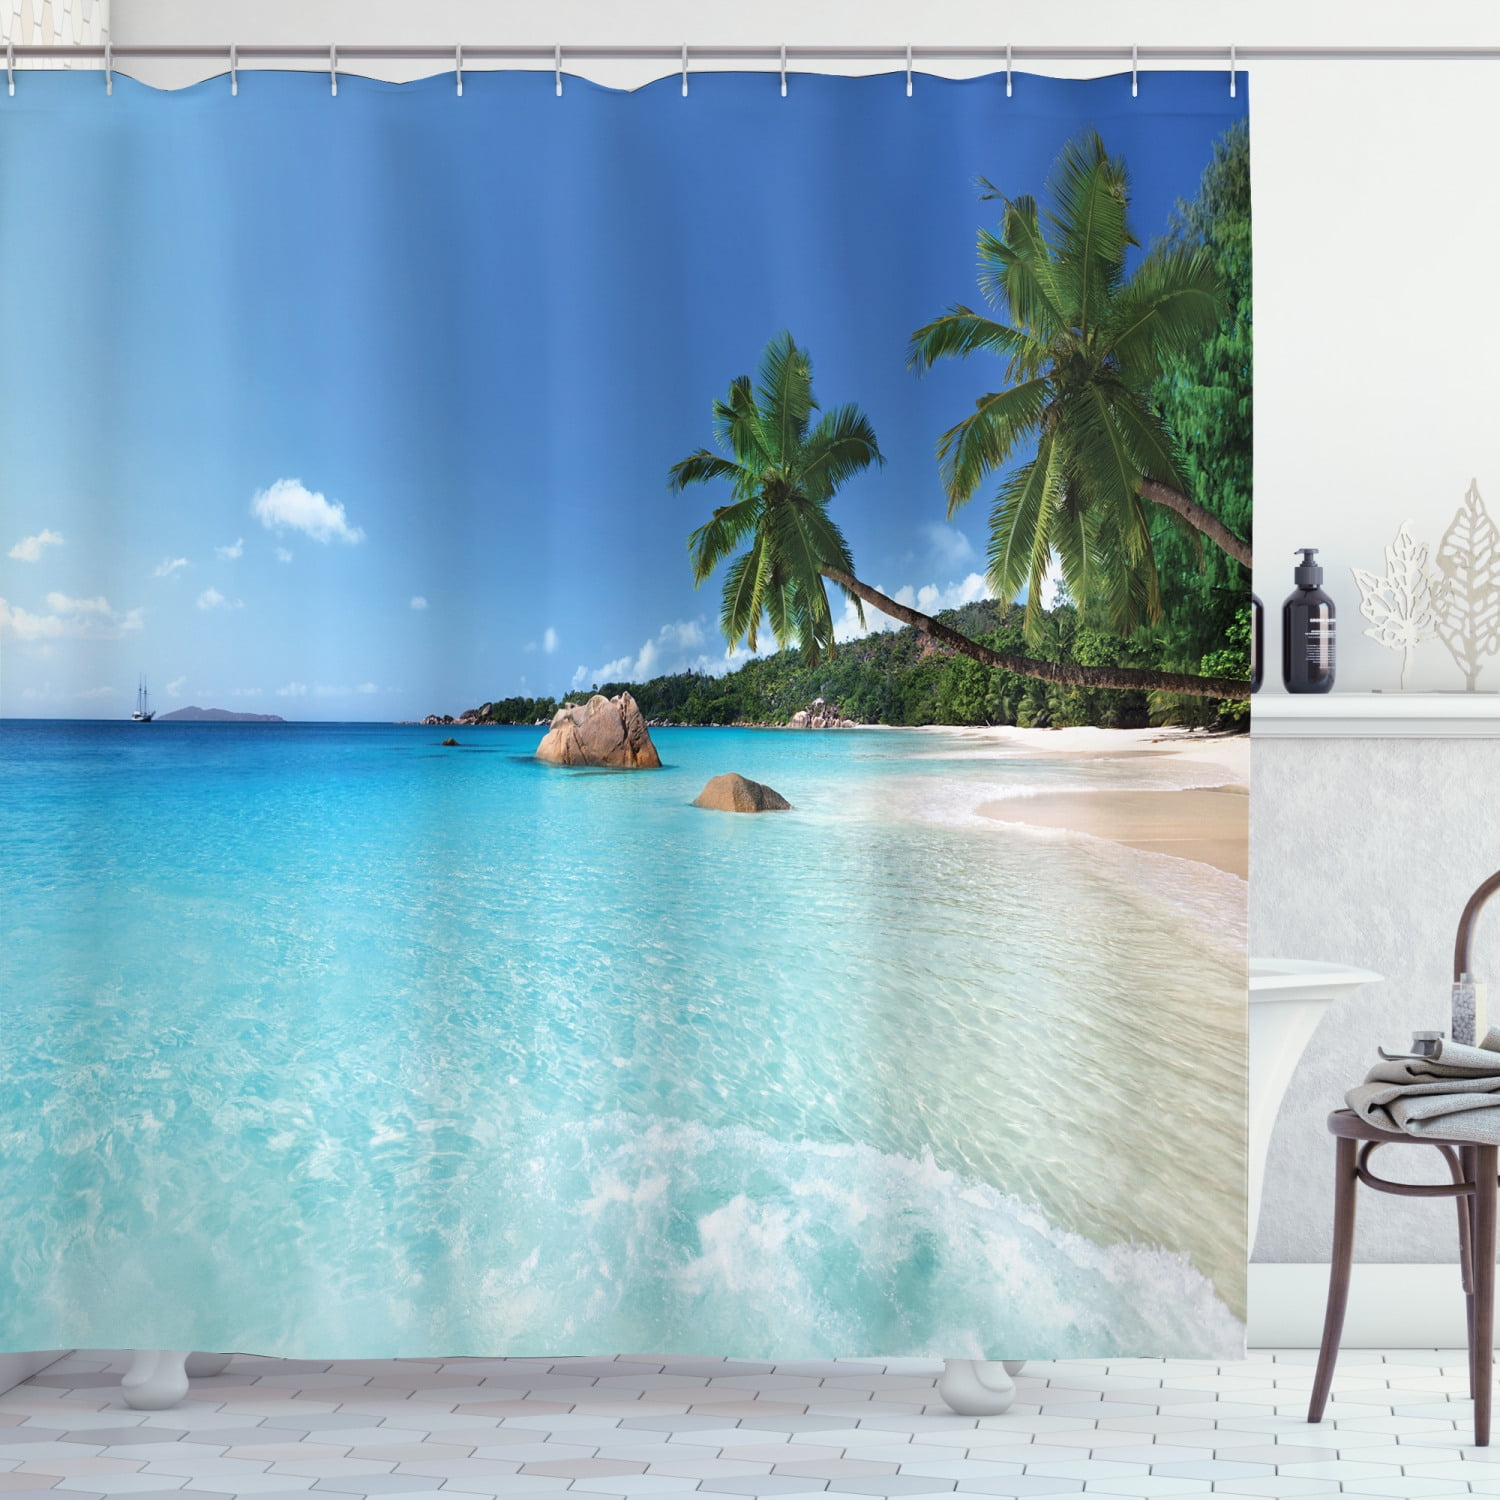 Ambesonne Tropical Island Decor Collection Navy Blue White 69 W By 70 L Polyester Fabric Bathroom Shower Curtain Set with Hooks Ocean Waves Seychelles Beach in Sunset Time Picture Print 